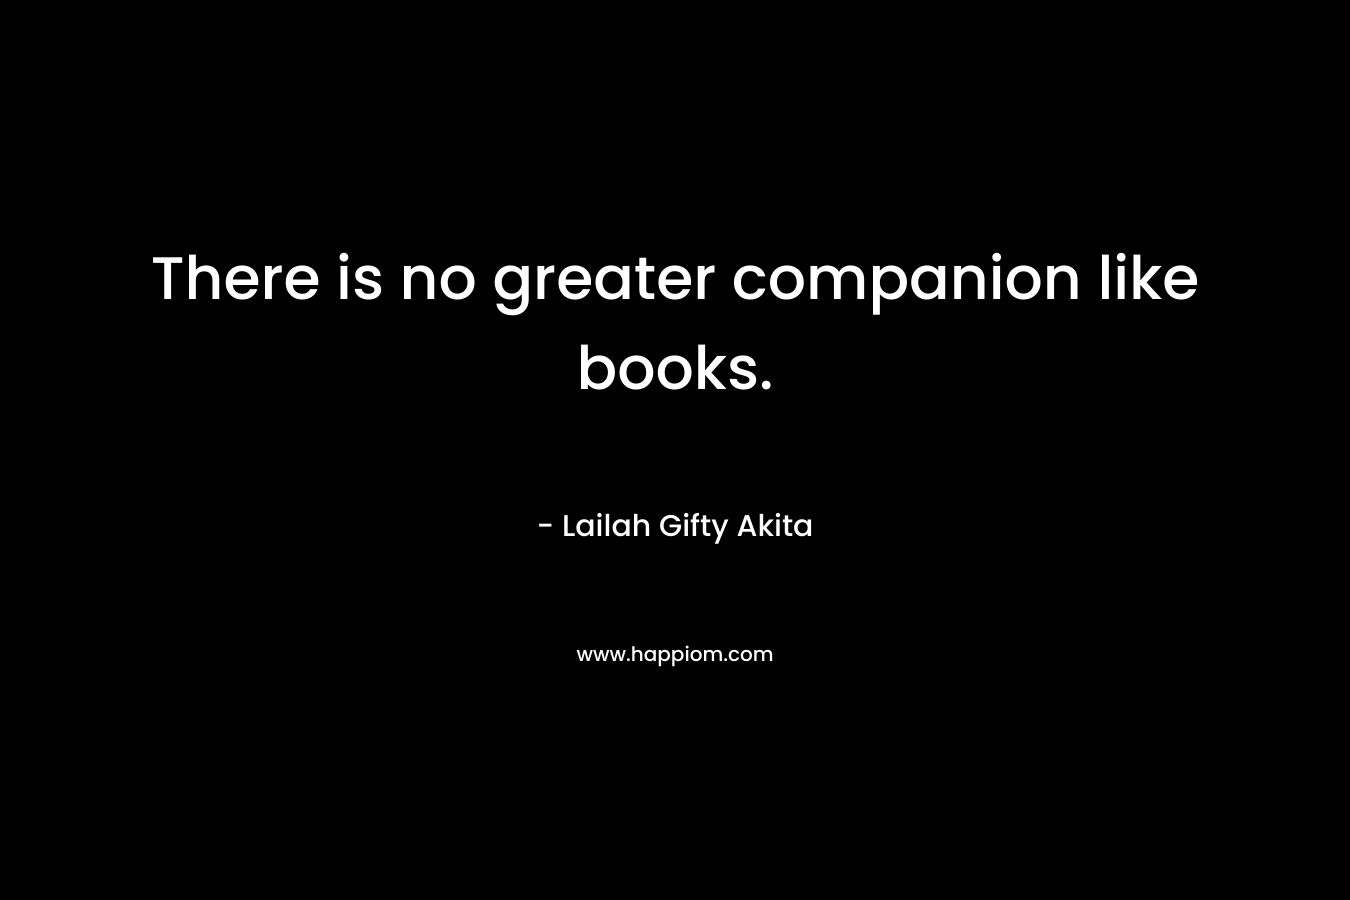 There is no greater companion like books.